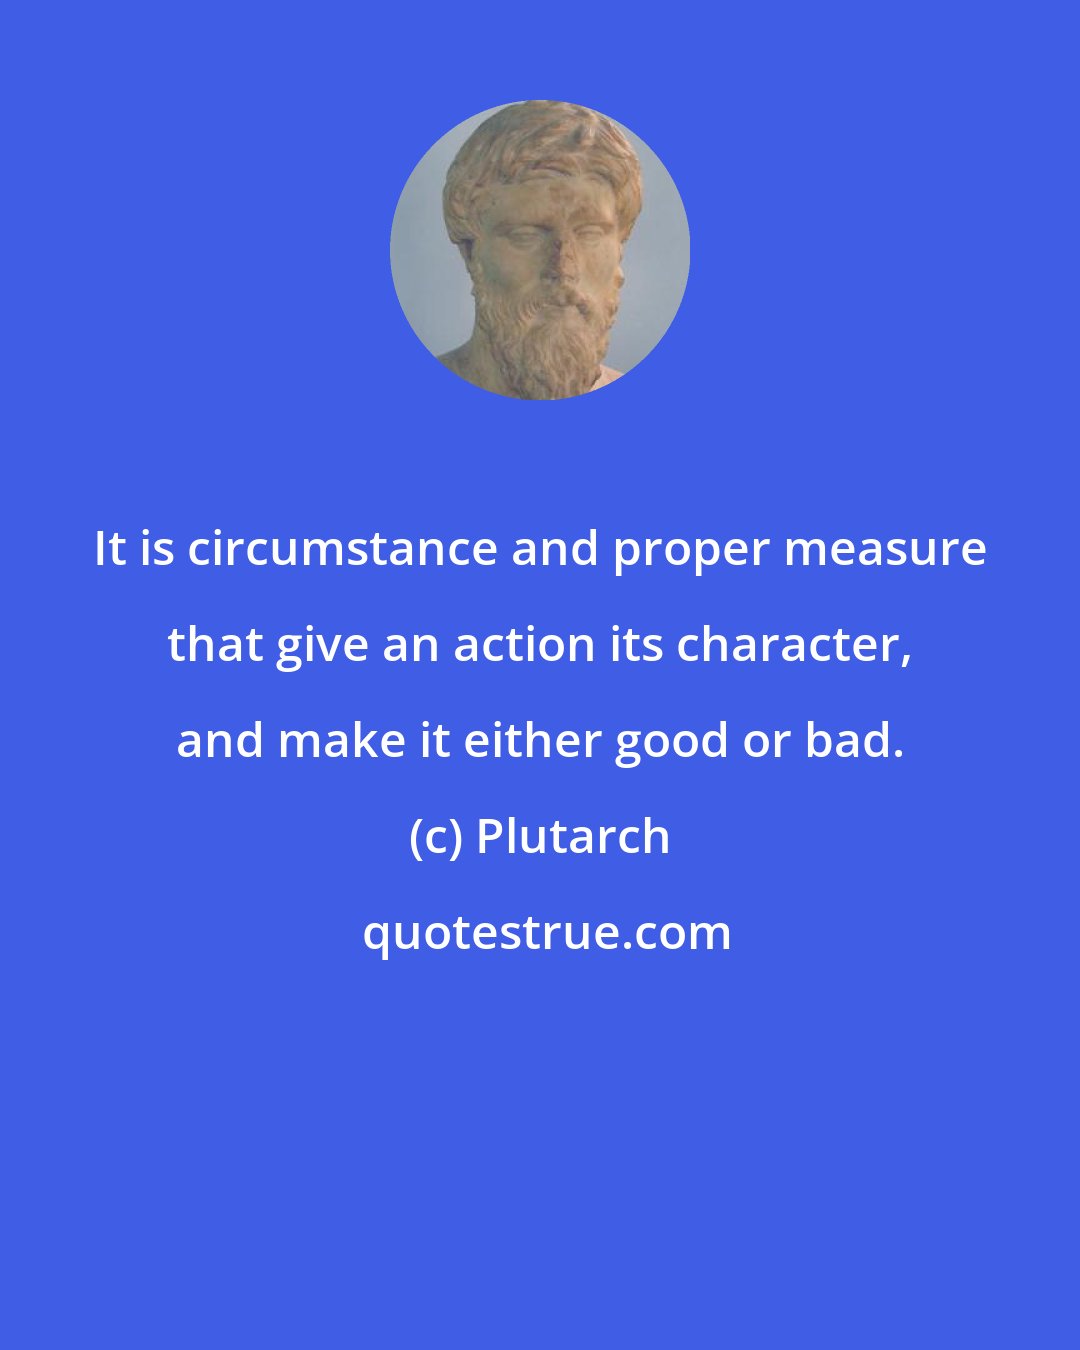 Plutarch: It is circumstance and proper measure that give an action its character, and make it either good or bad.